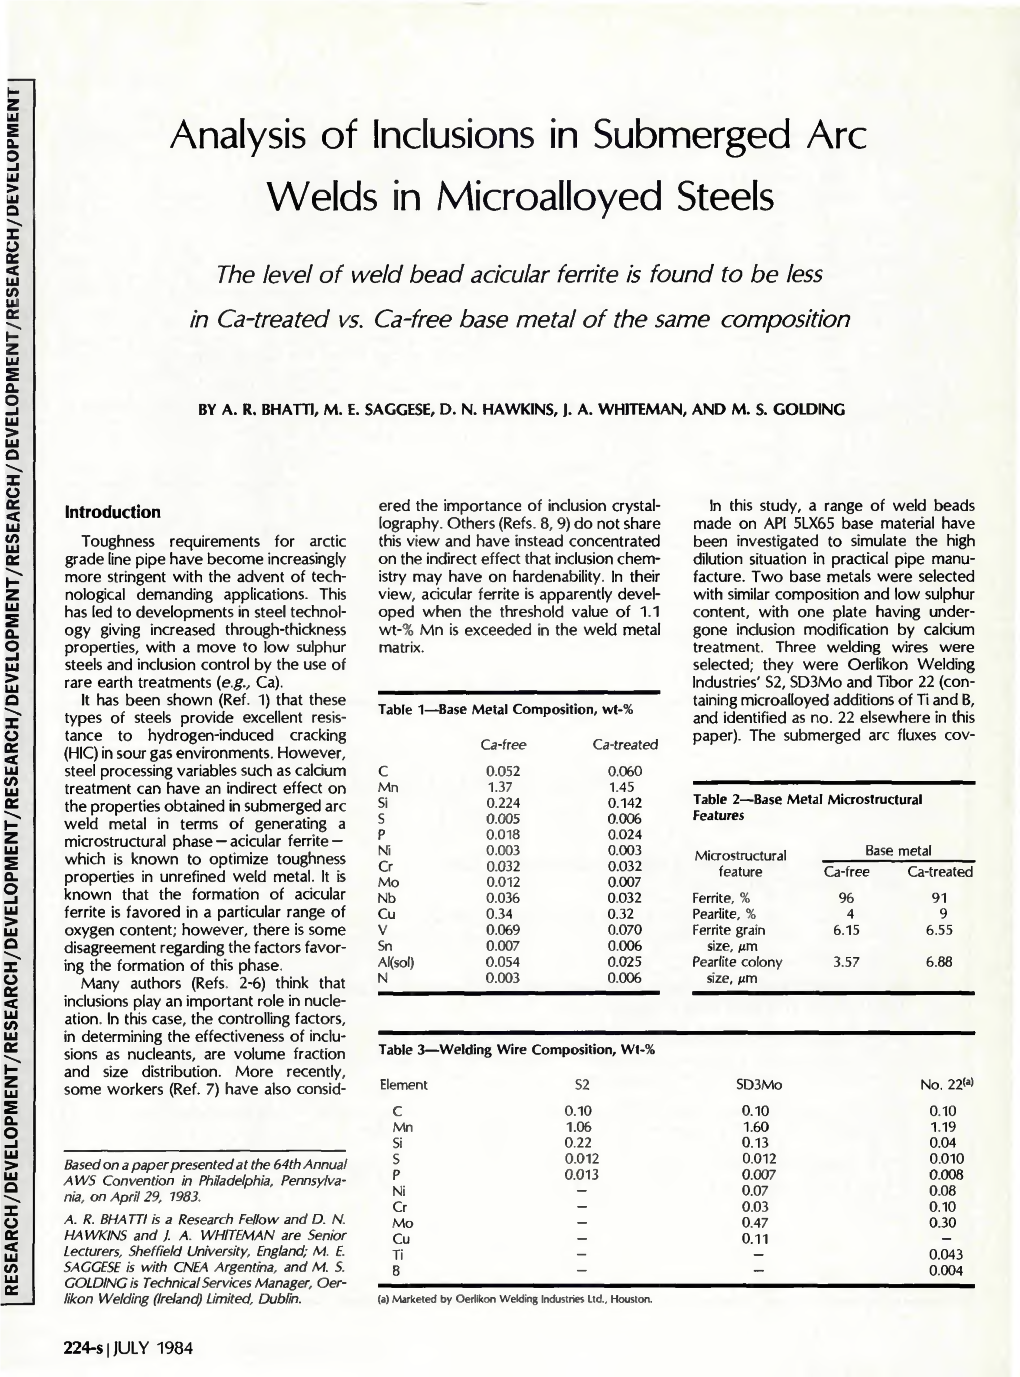 Analysis of Inclusions in Submerged Arc Welds in Microalloyed Steels